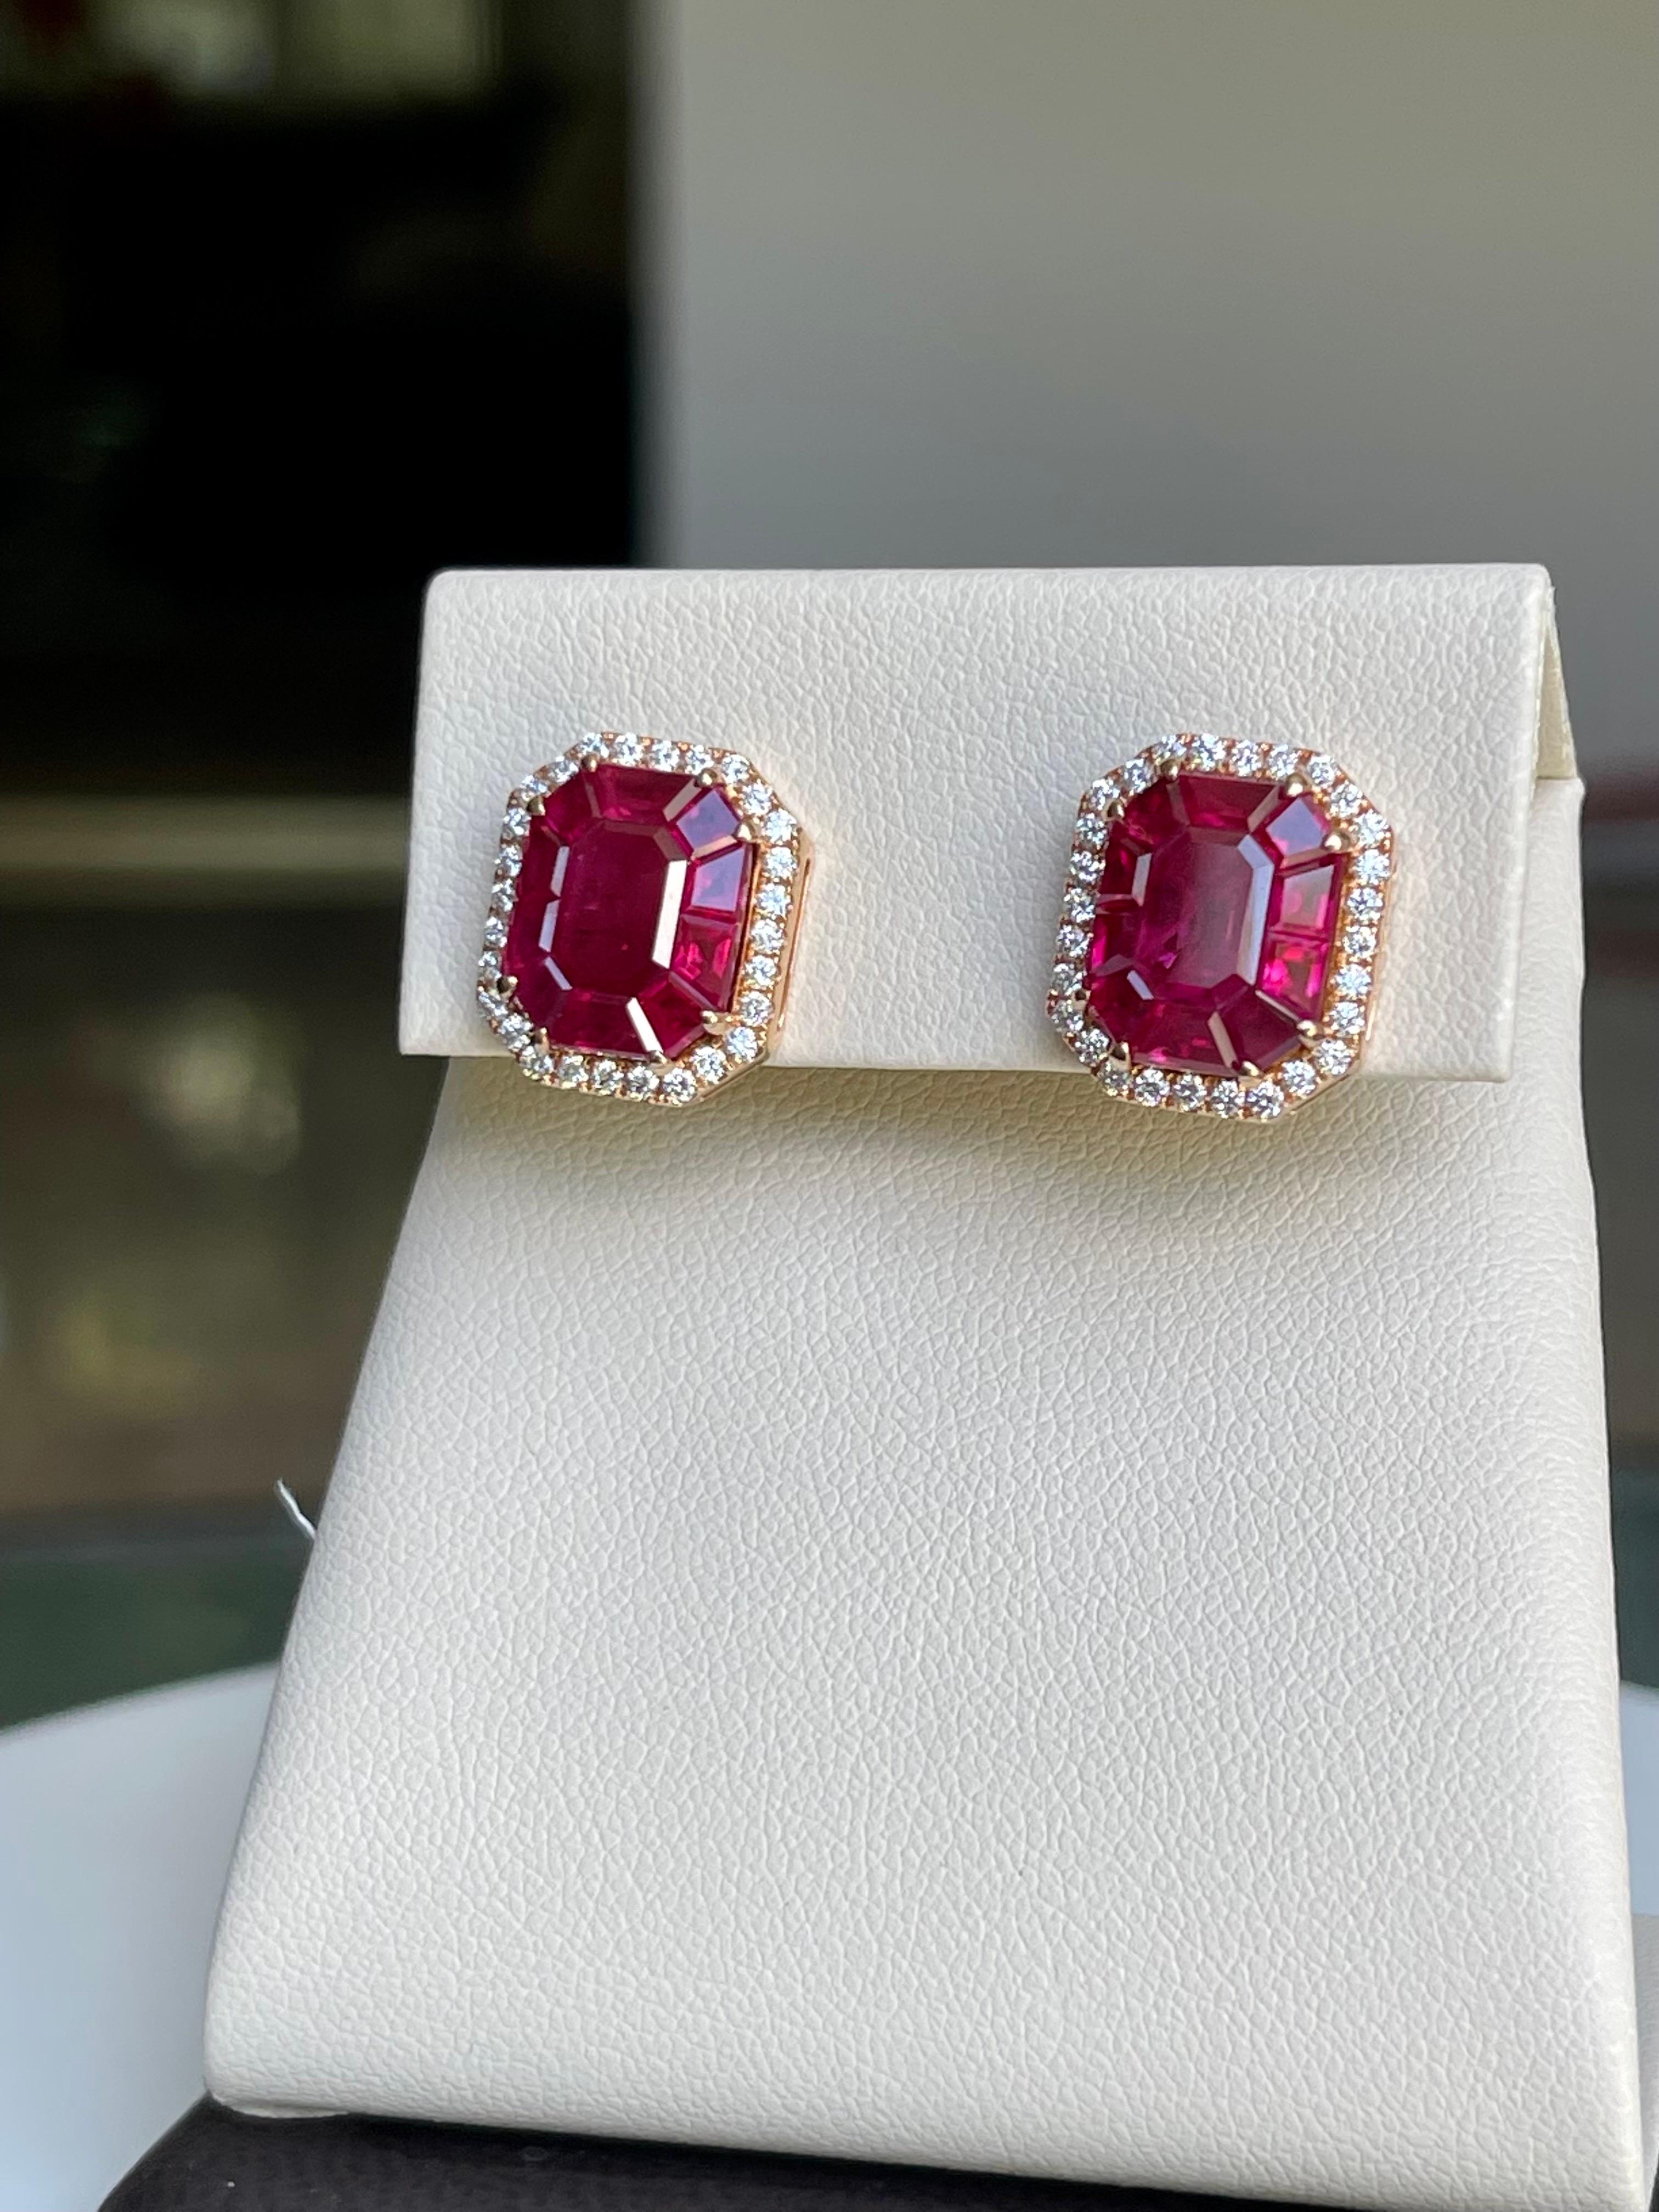 12 Carat Natural Burma Ruby and Diamond Earring in 18 Karat Yellow Gold For Sale 10